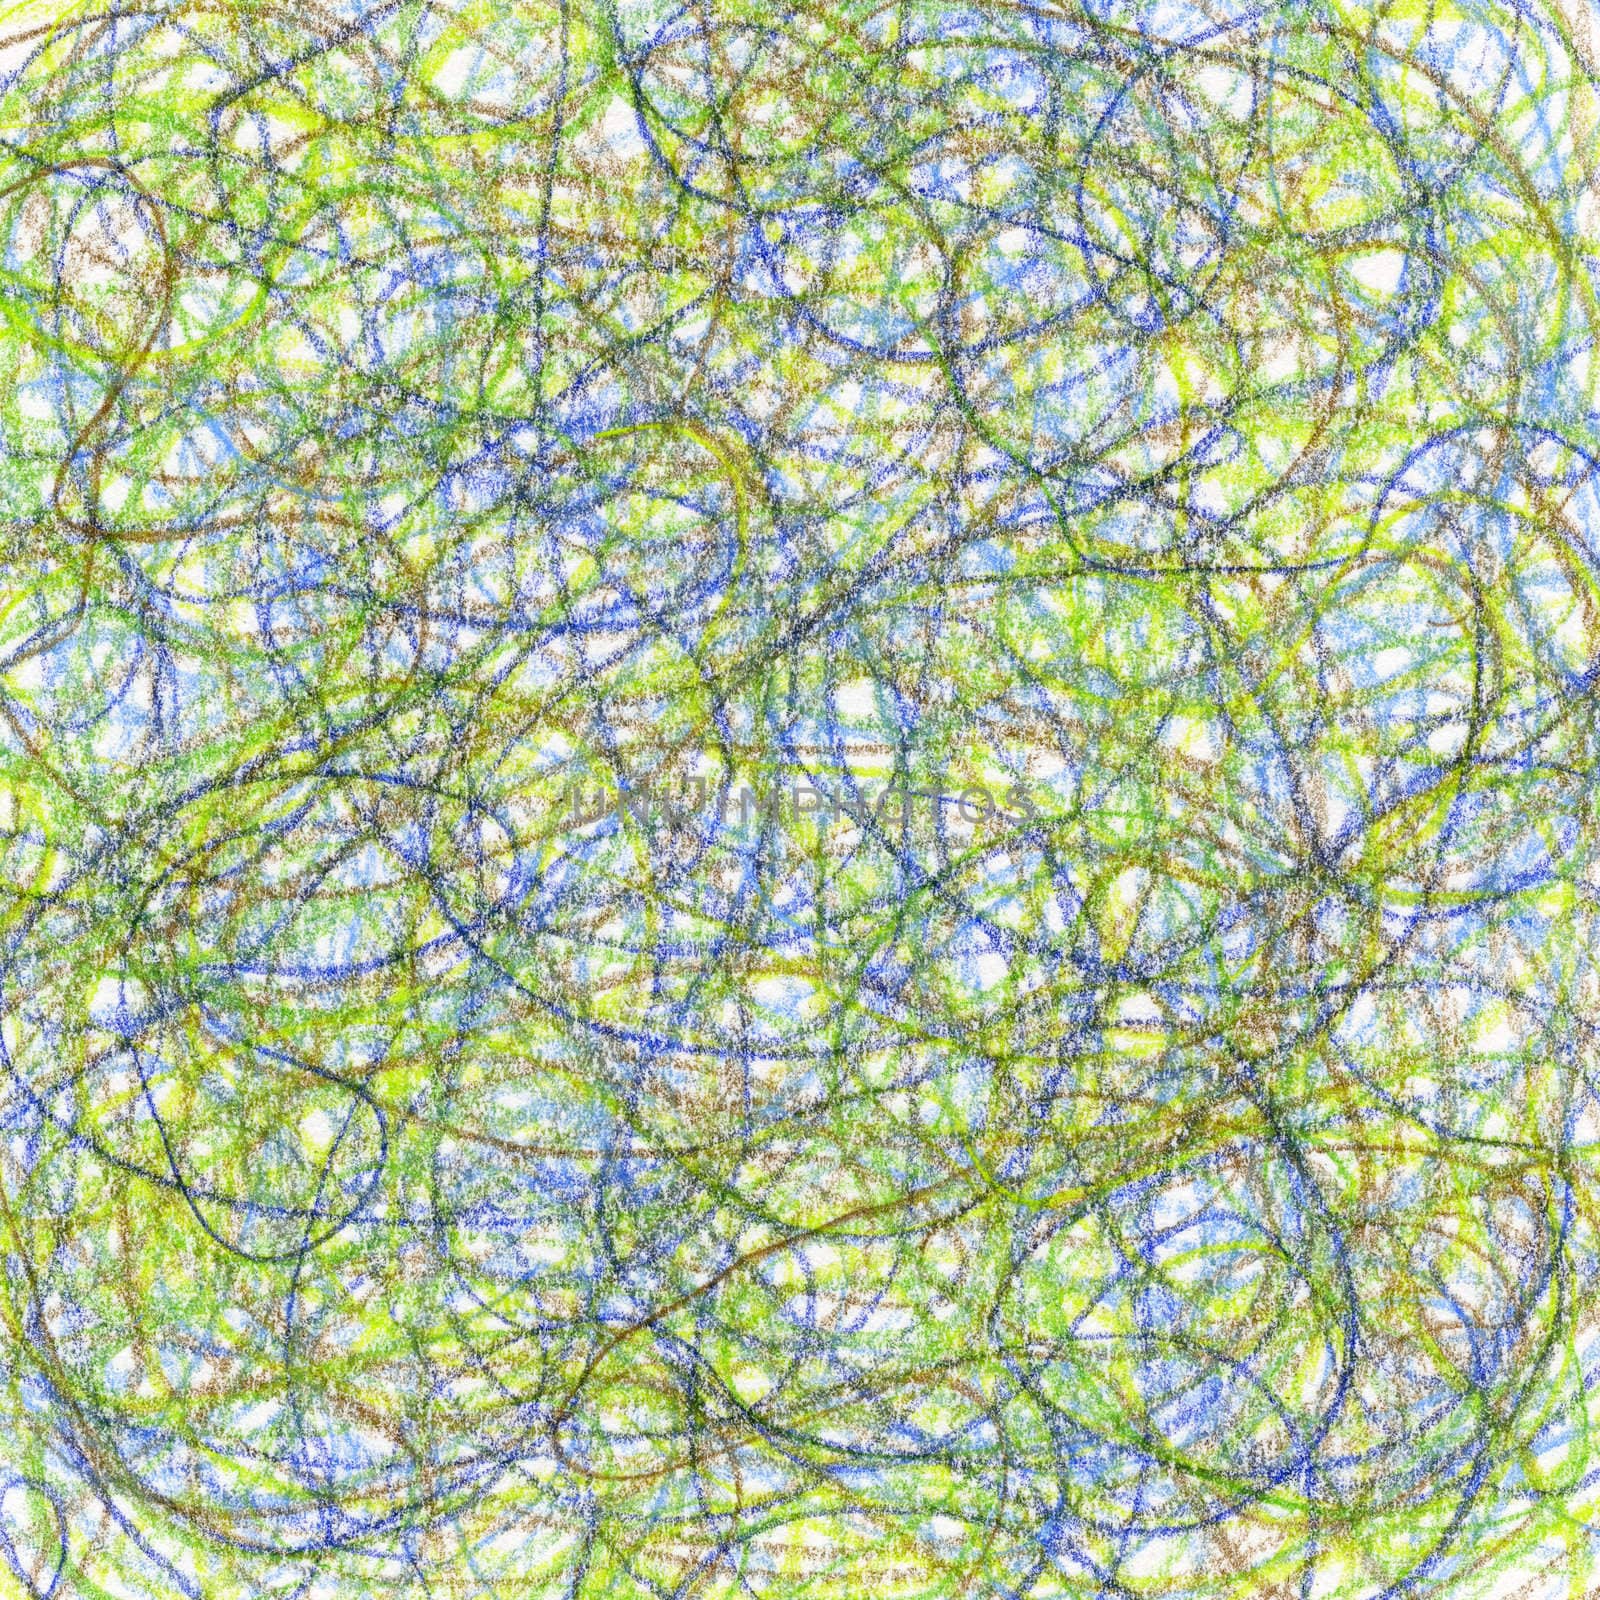 hand-drawn crayon circular scribble background in blue, green and brown colors